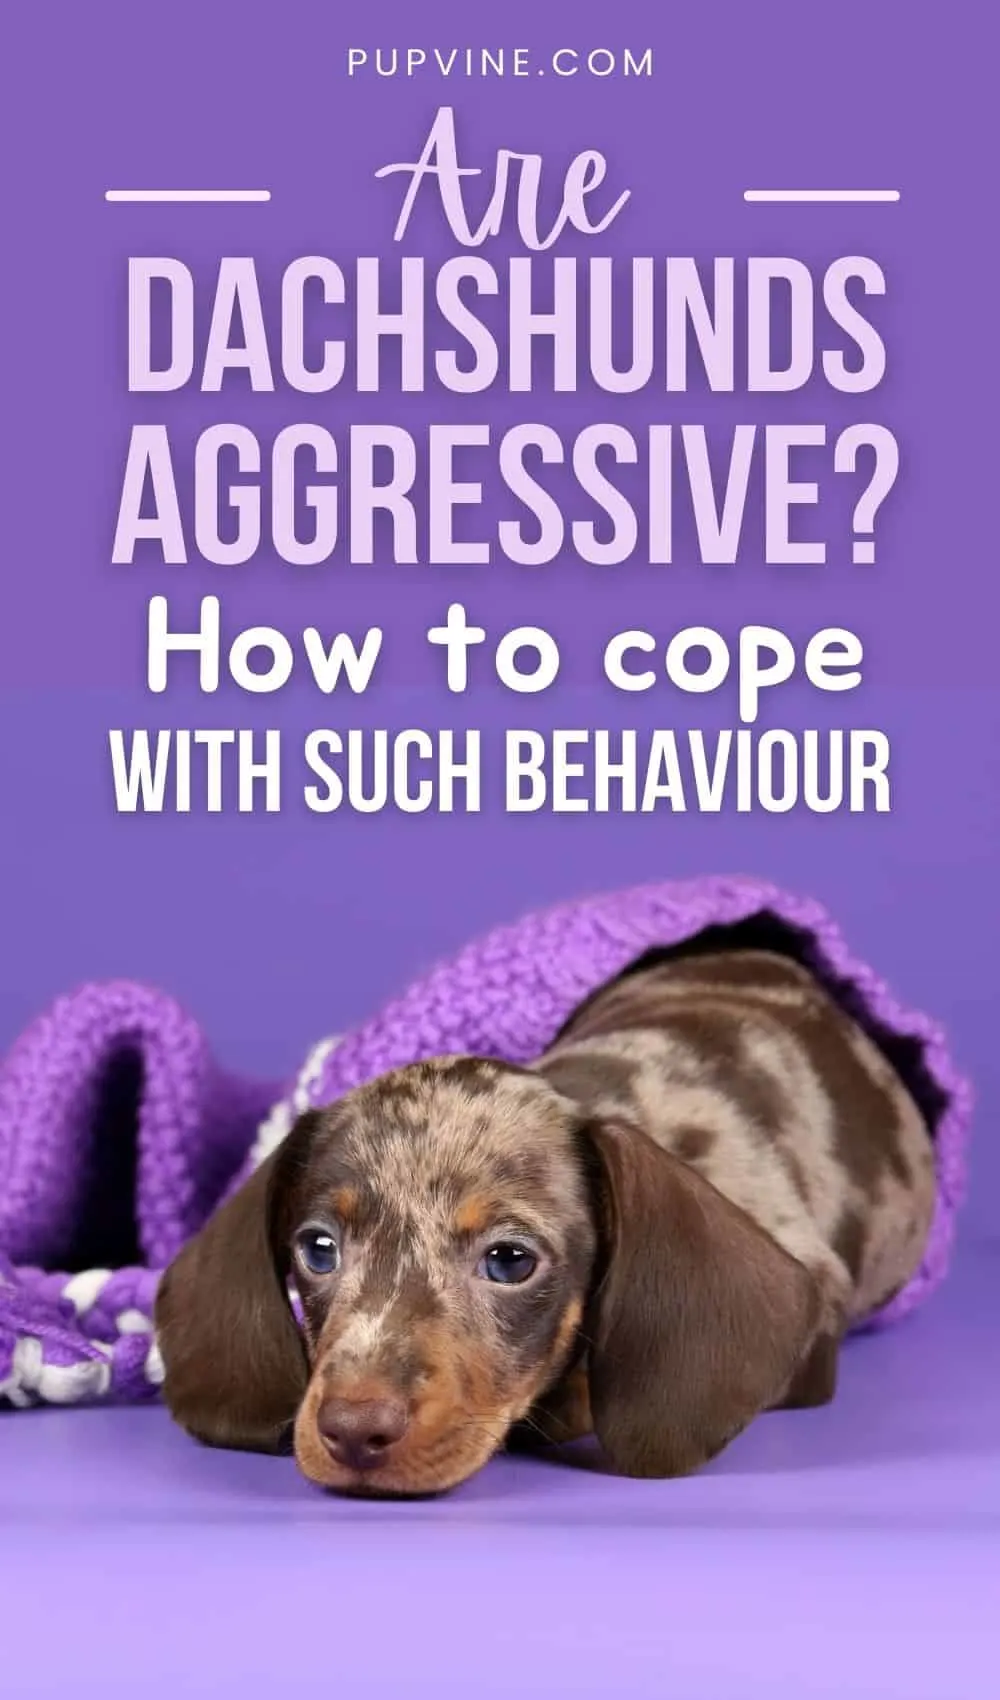 Are Dachshunds aggressive? How To Cope With Such Behaviour